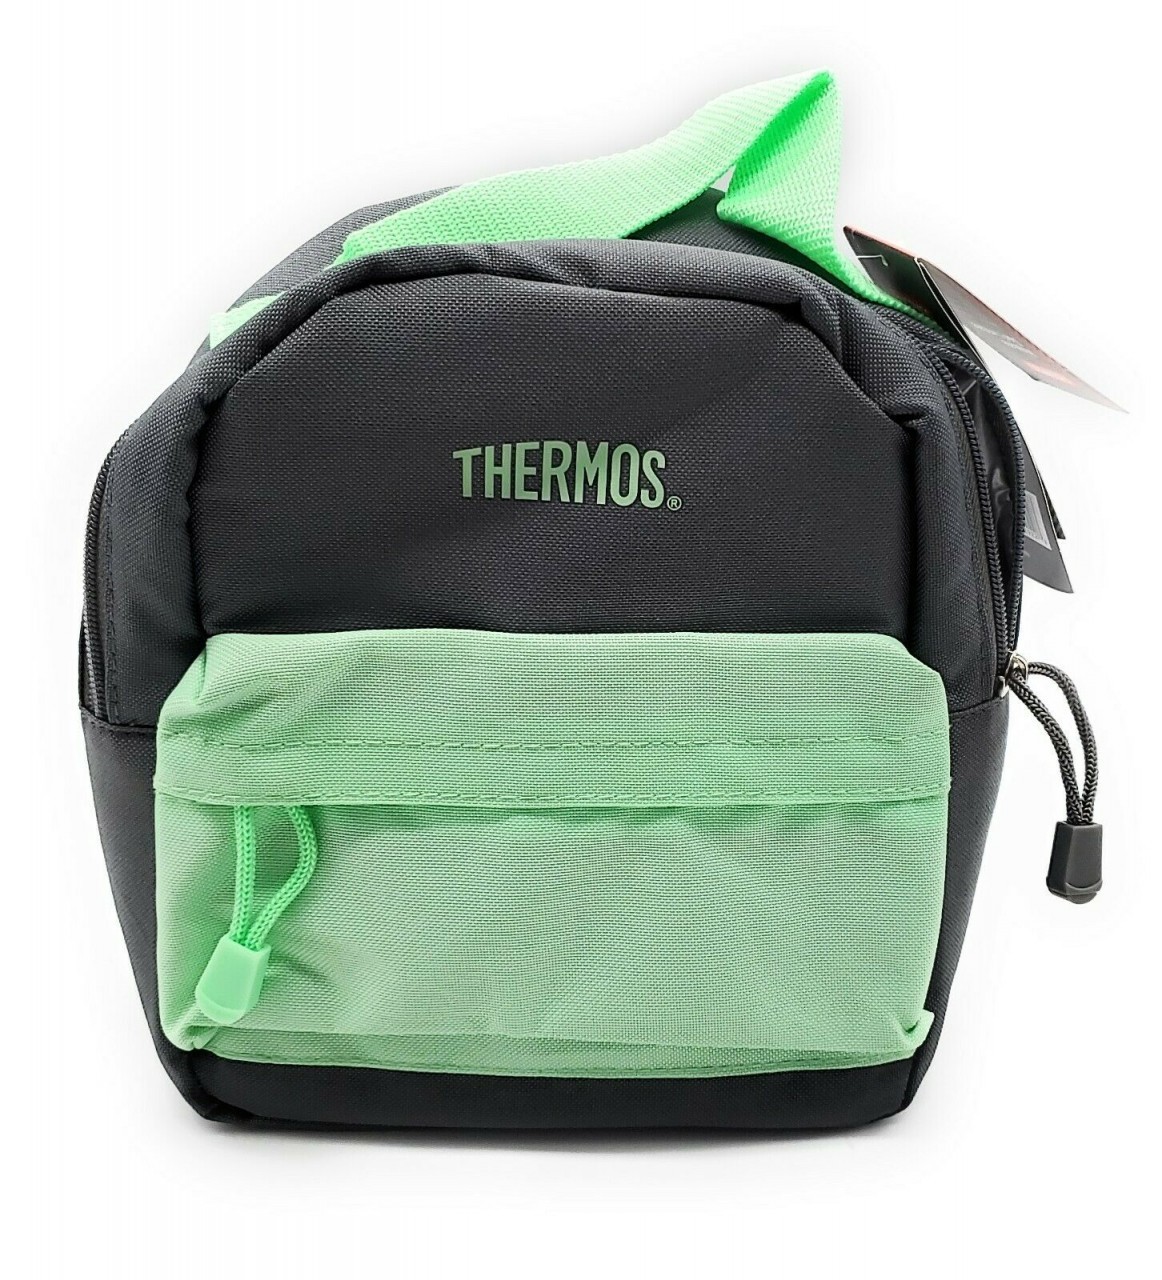 Thermos Insulated Lunch Kit Bag Gray & Green